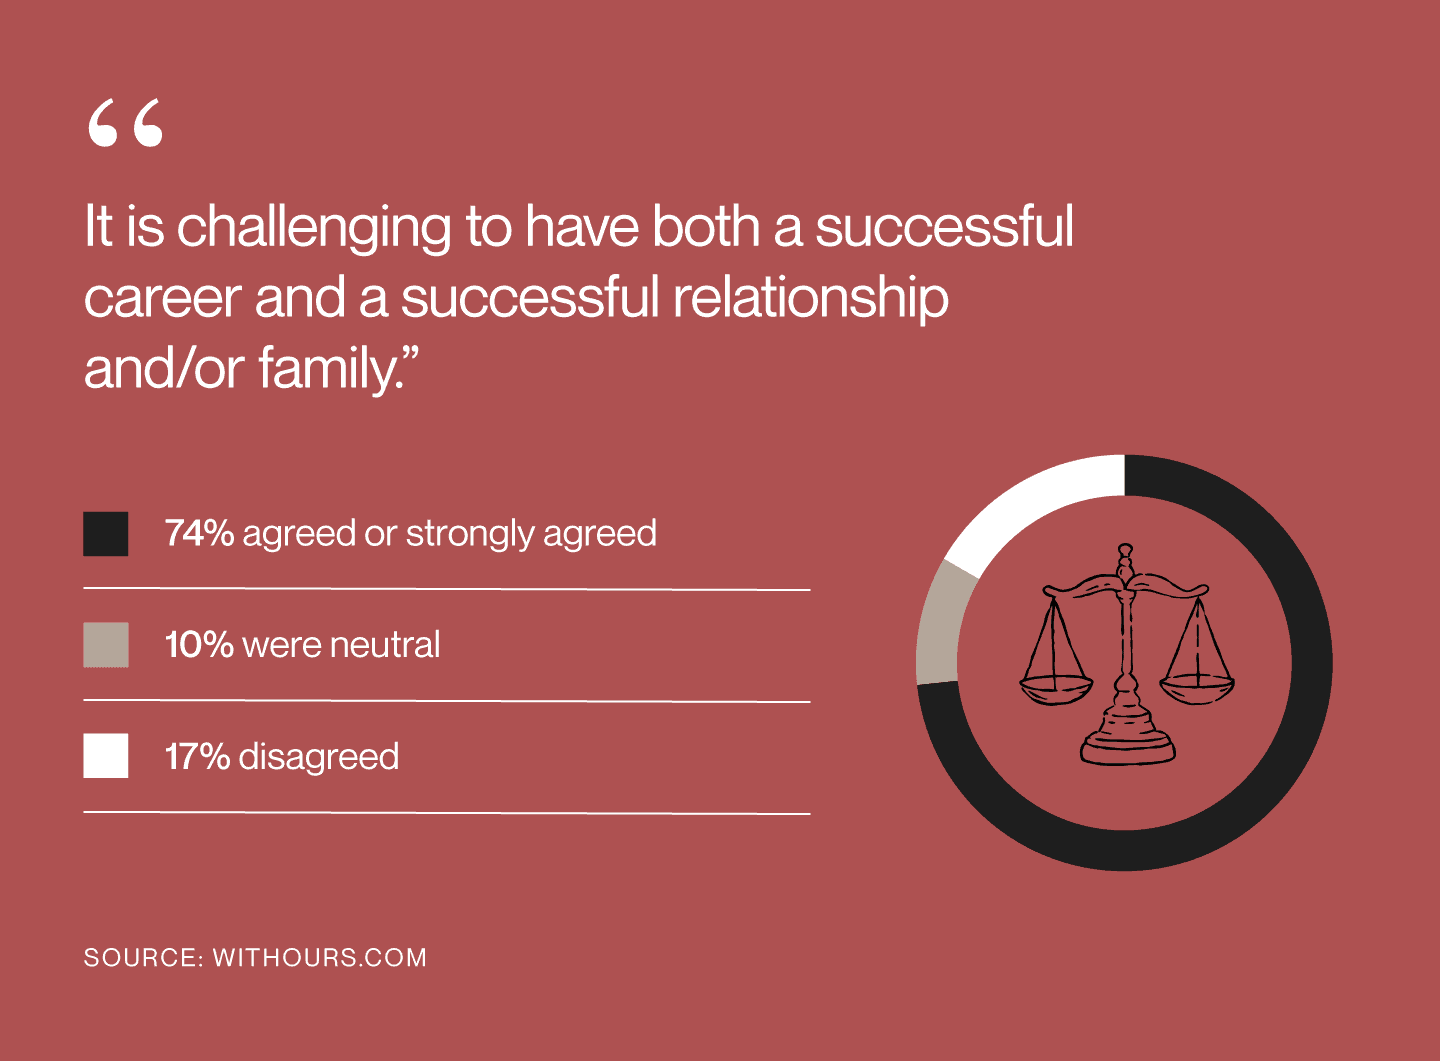 Nearly three-fourths of people believe having a successful career and relationship/family is challenging.